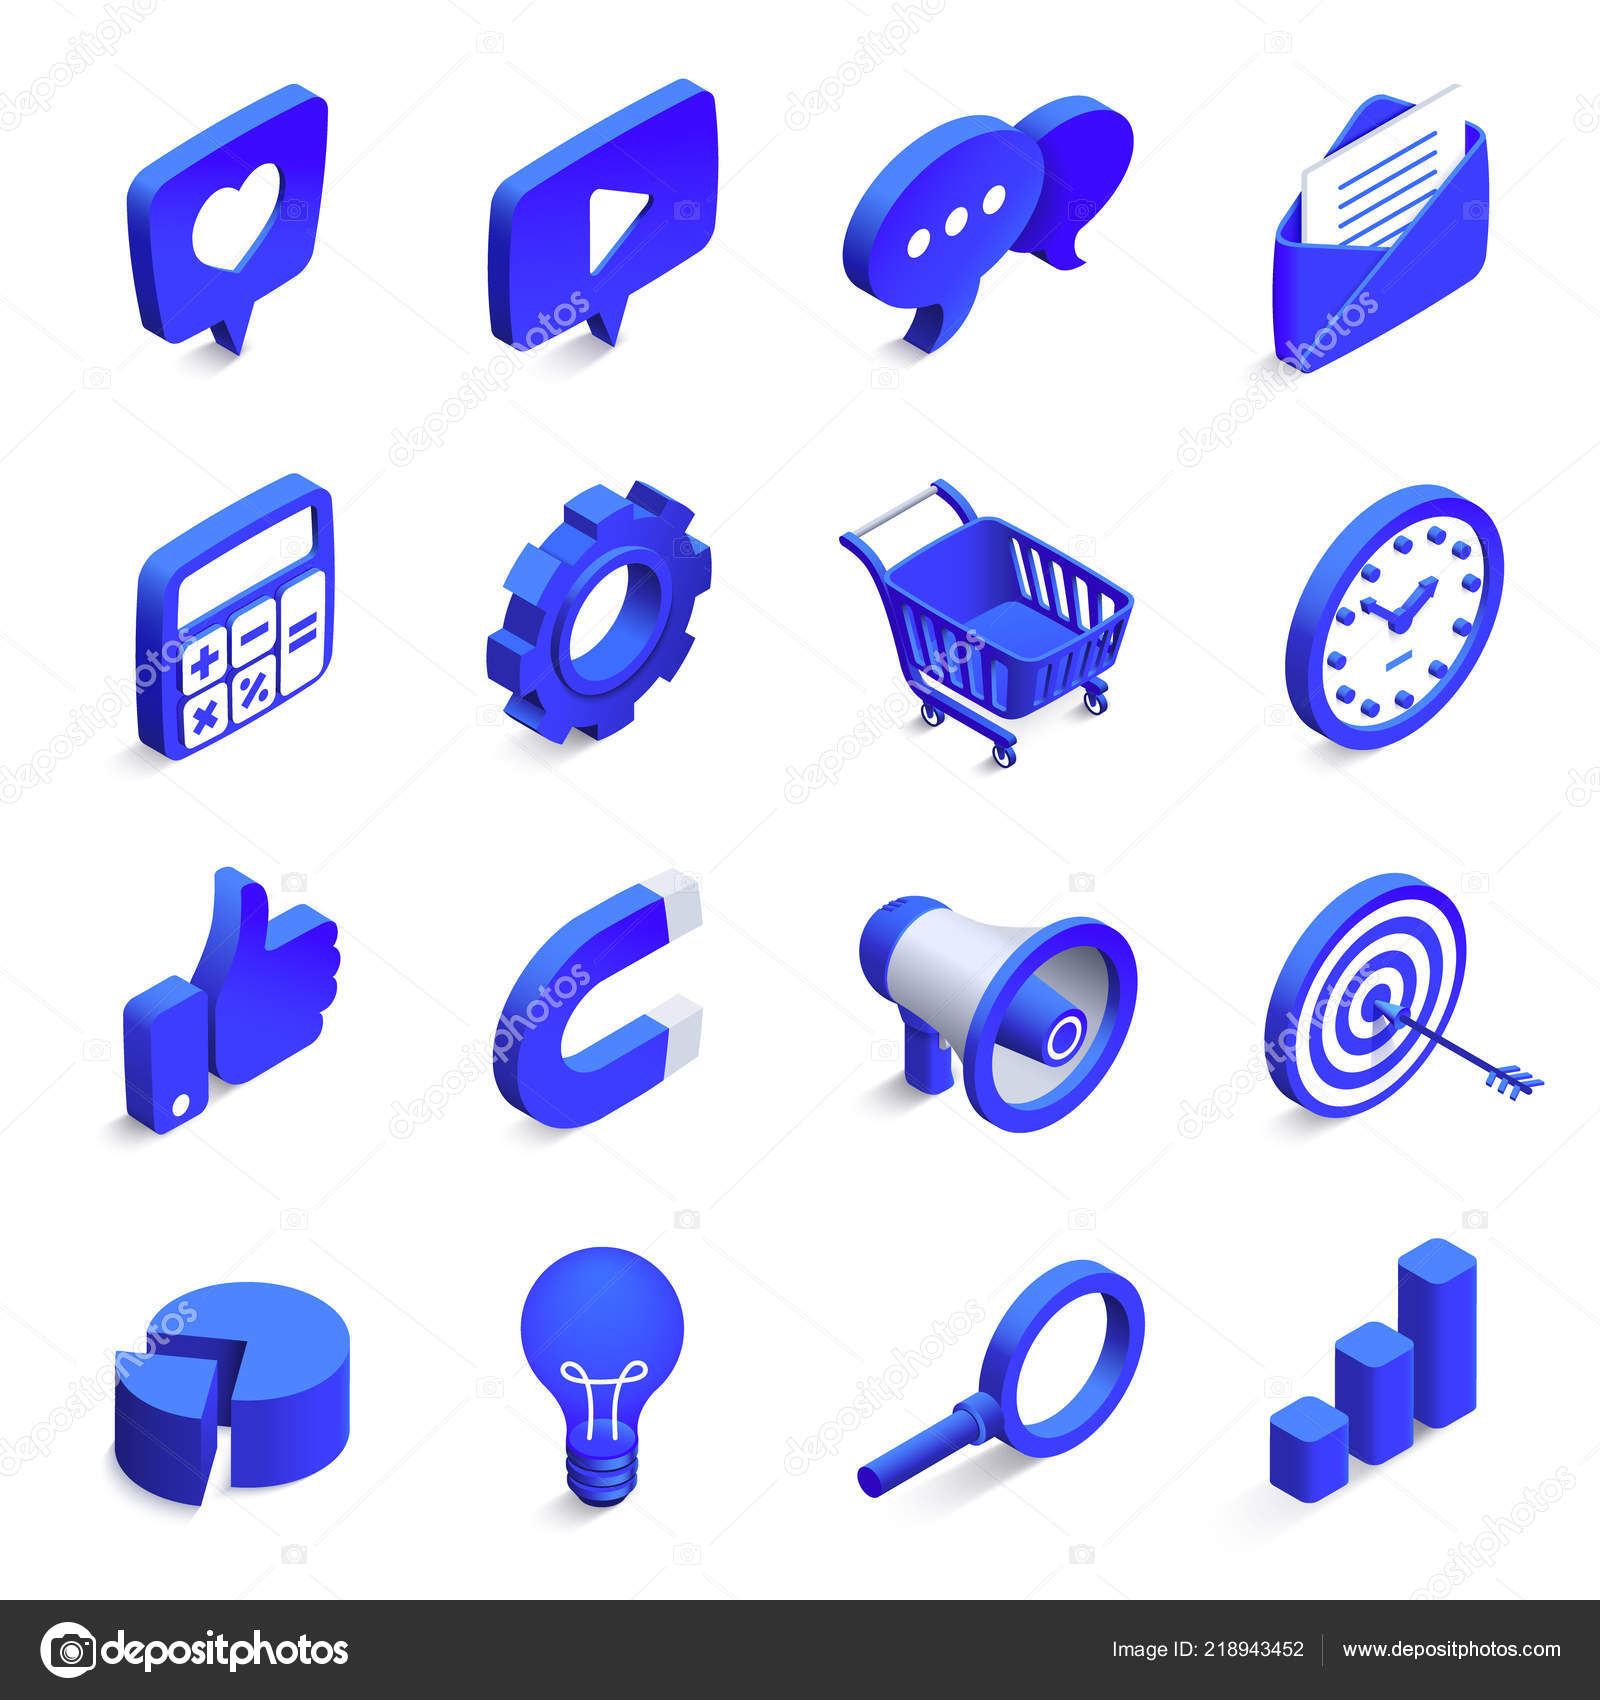 Magnetic bar icon isometric style Royalty Free Vector Image